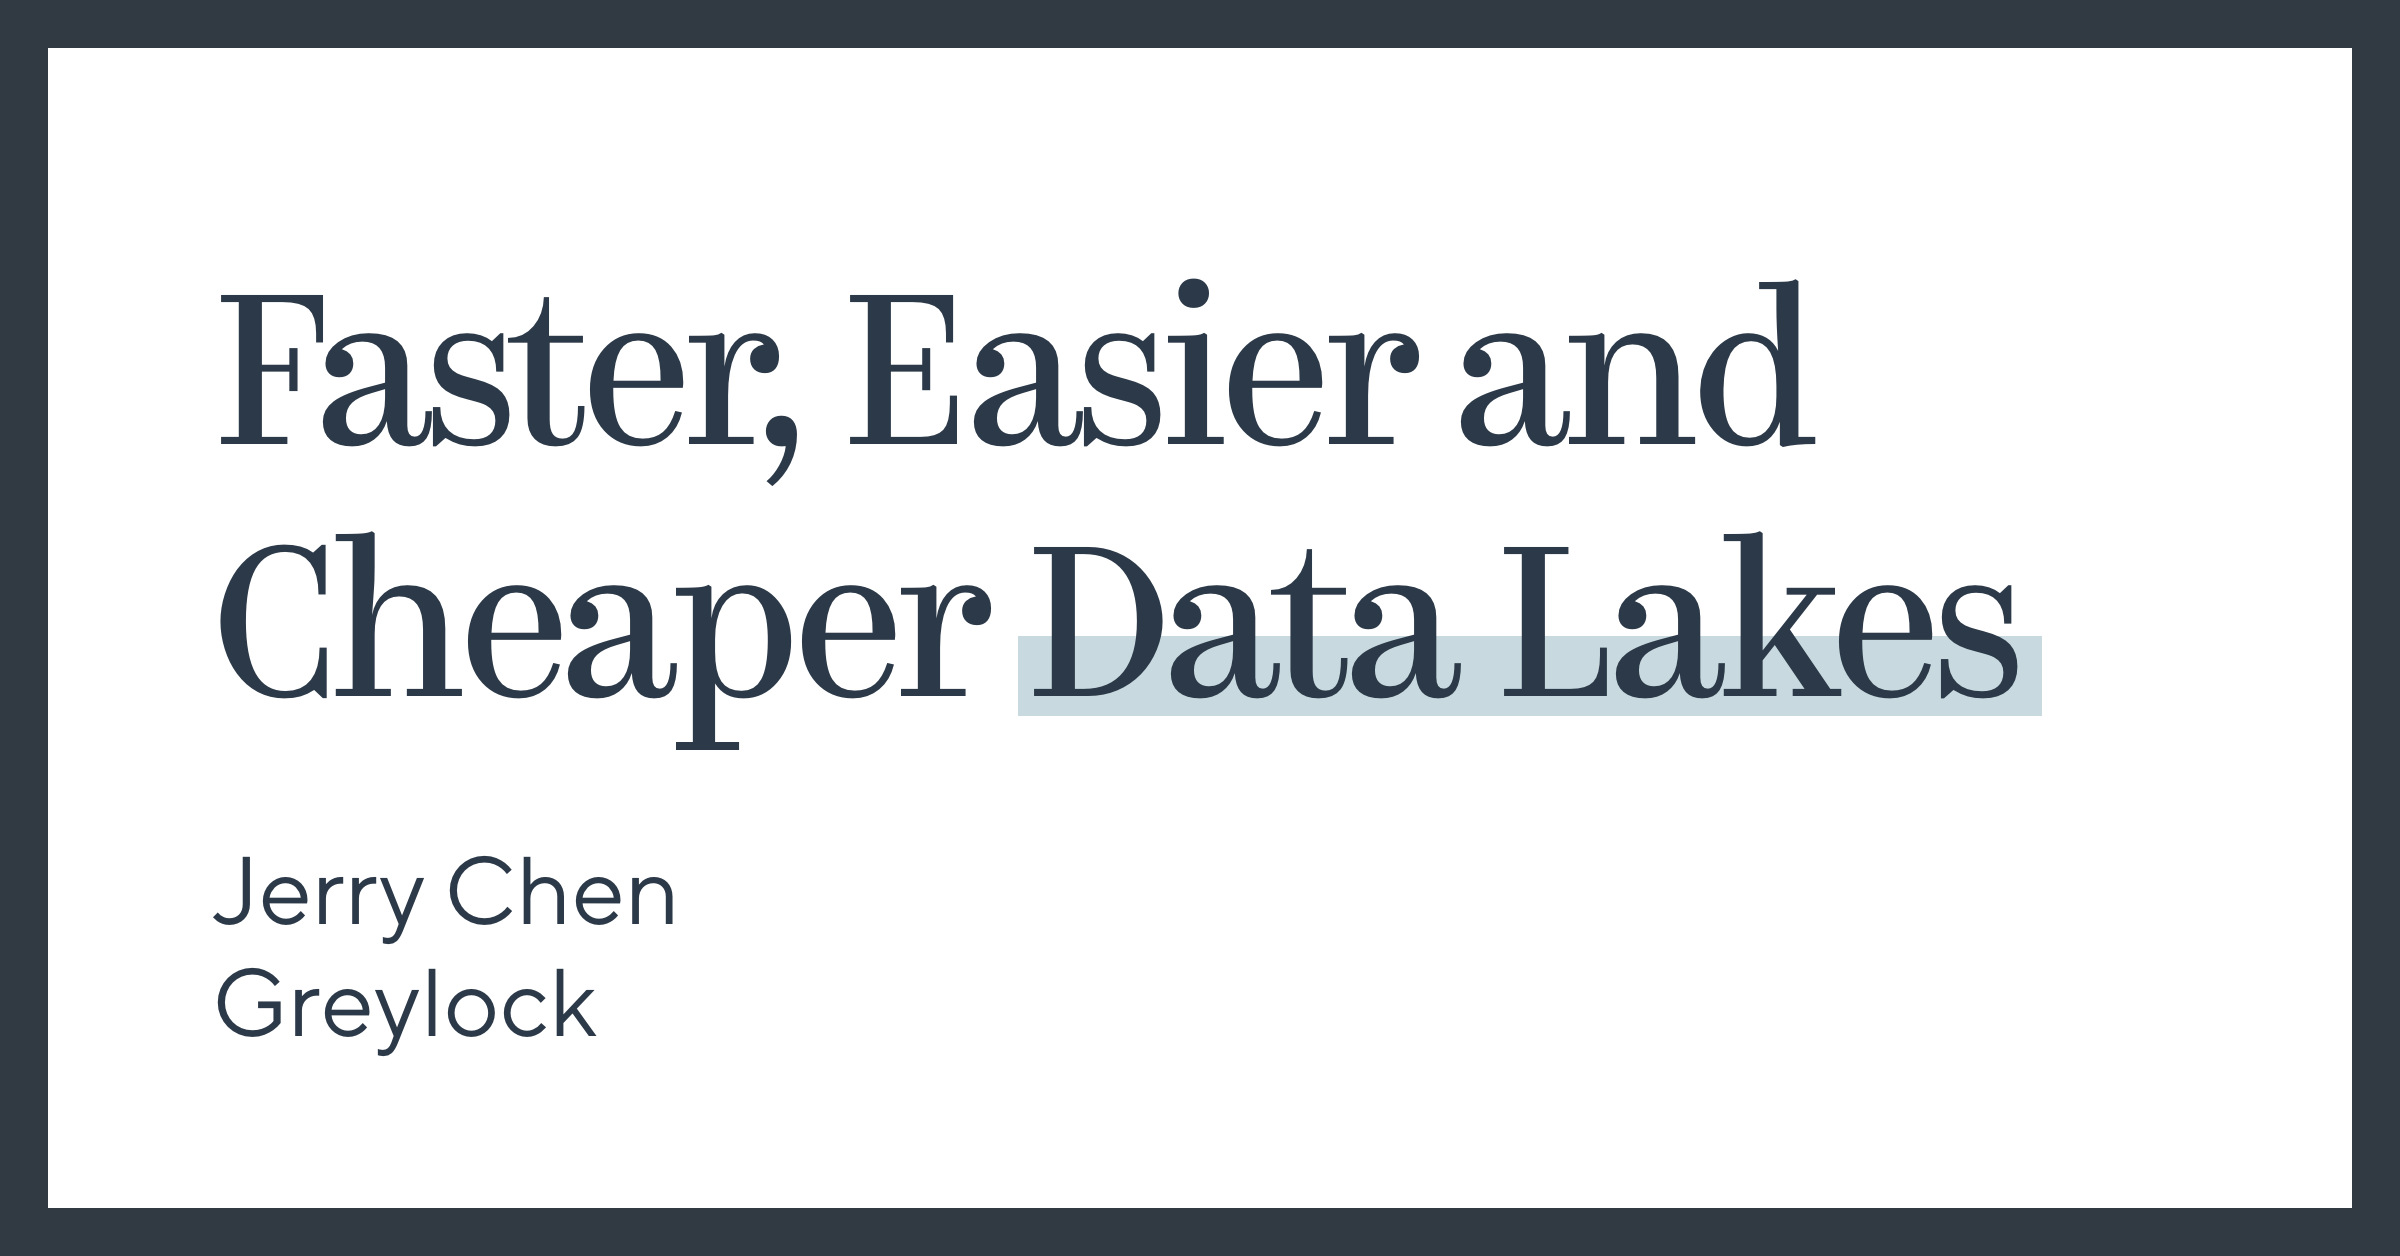 Faster, Easier, and Cheaper Data Lakes